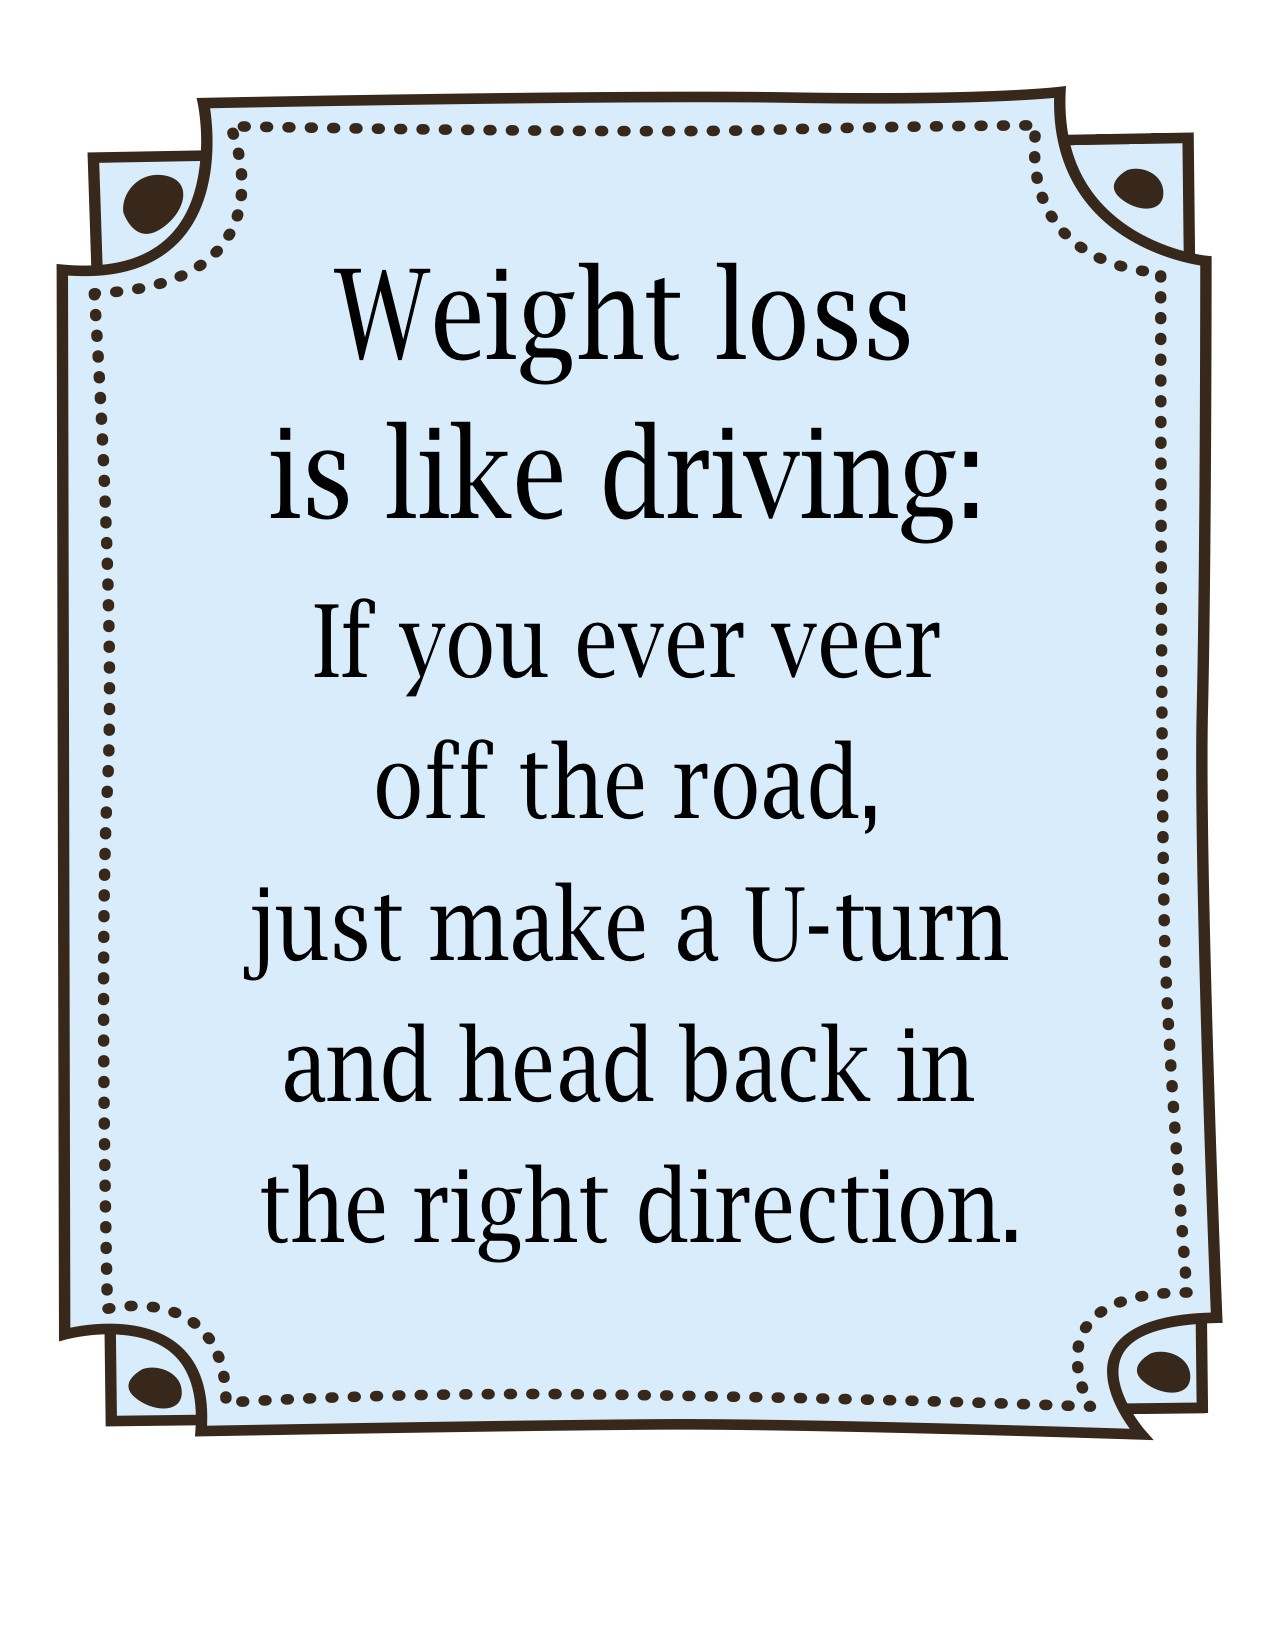 Motivational Weight Loss Quotes
 301 Moved Permanently